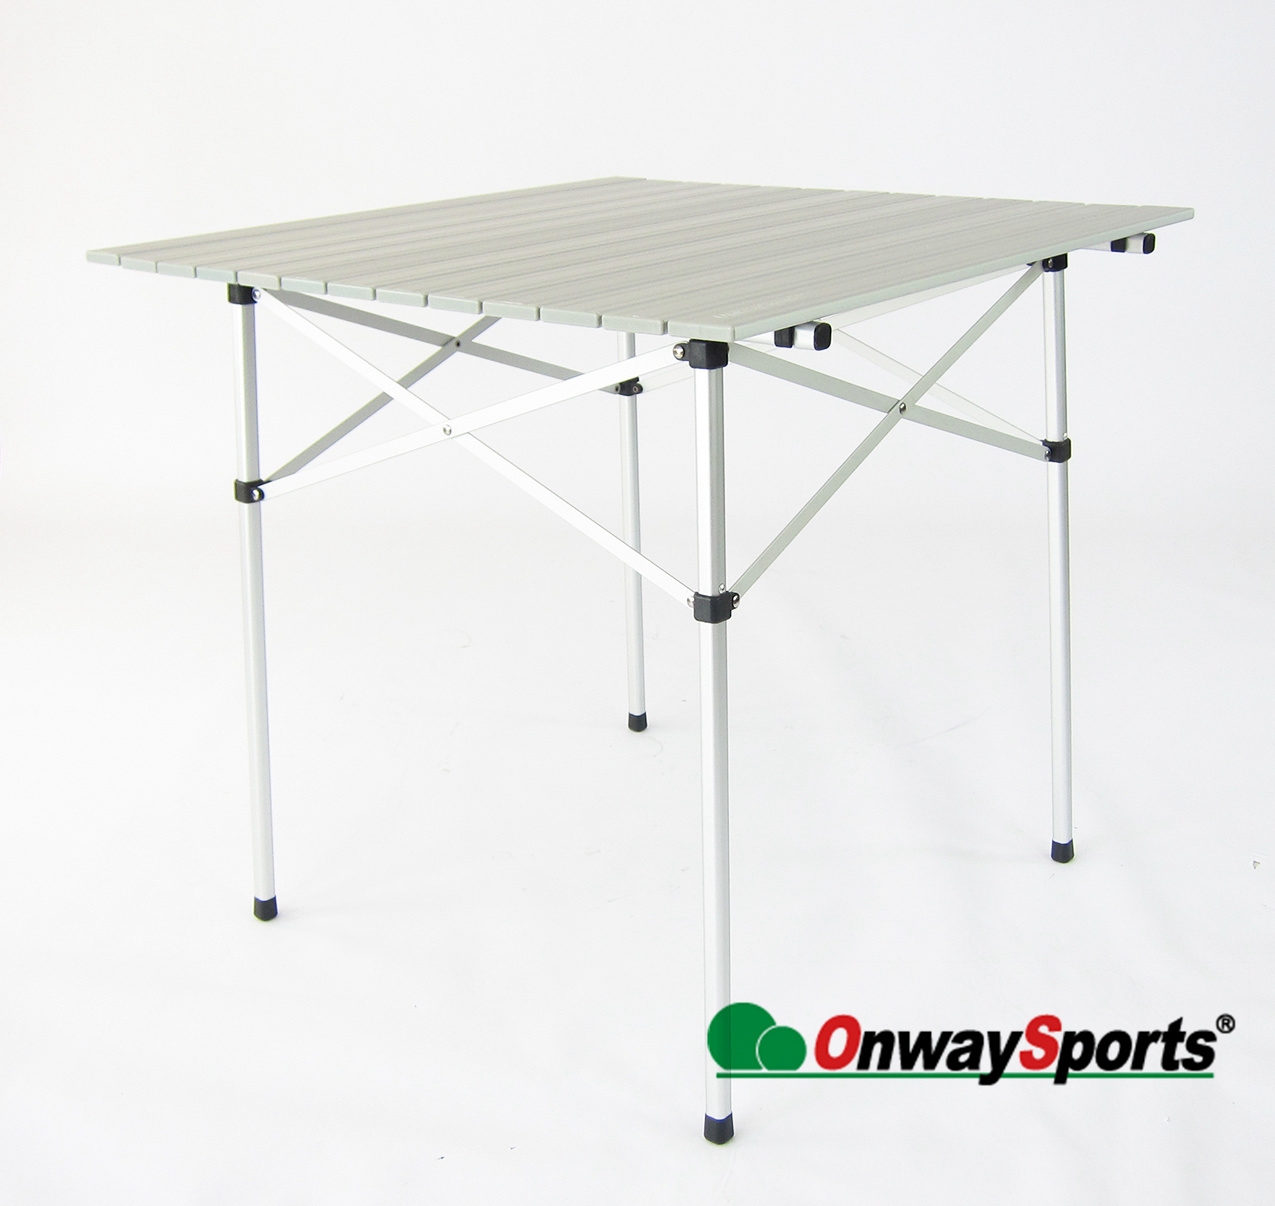 Aluminum Leisure Table for Picnic